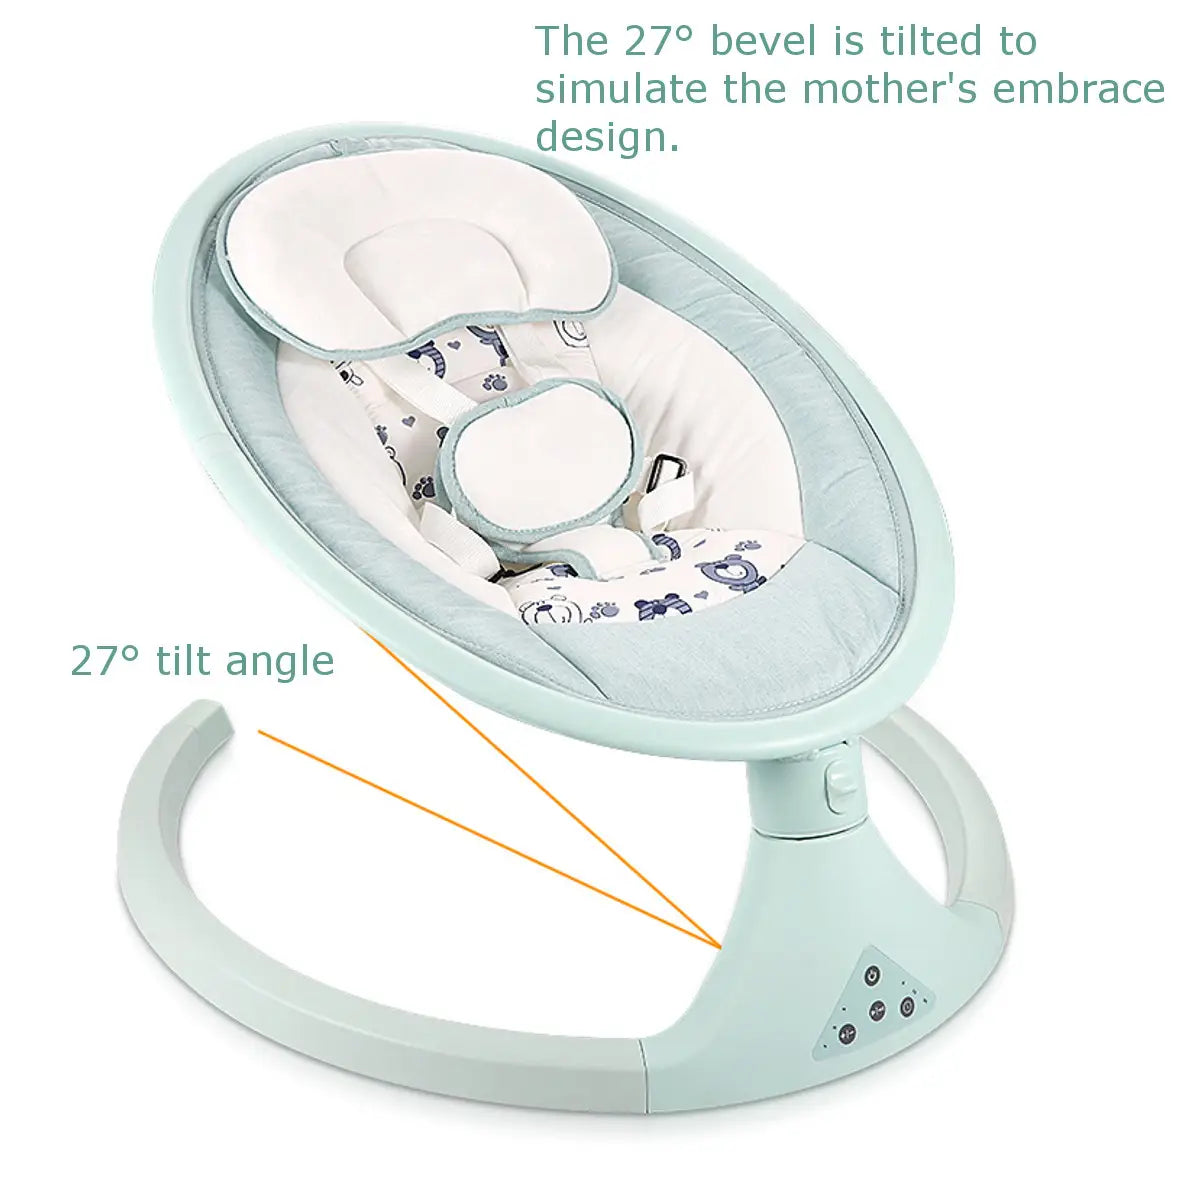 Bioby Baby Swing Bouncer Chair, Multi-function Music